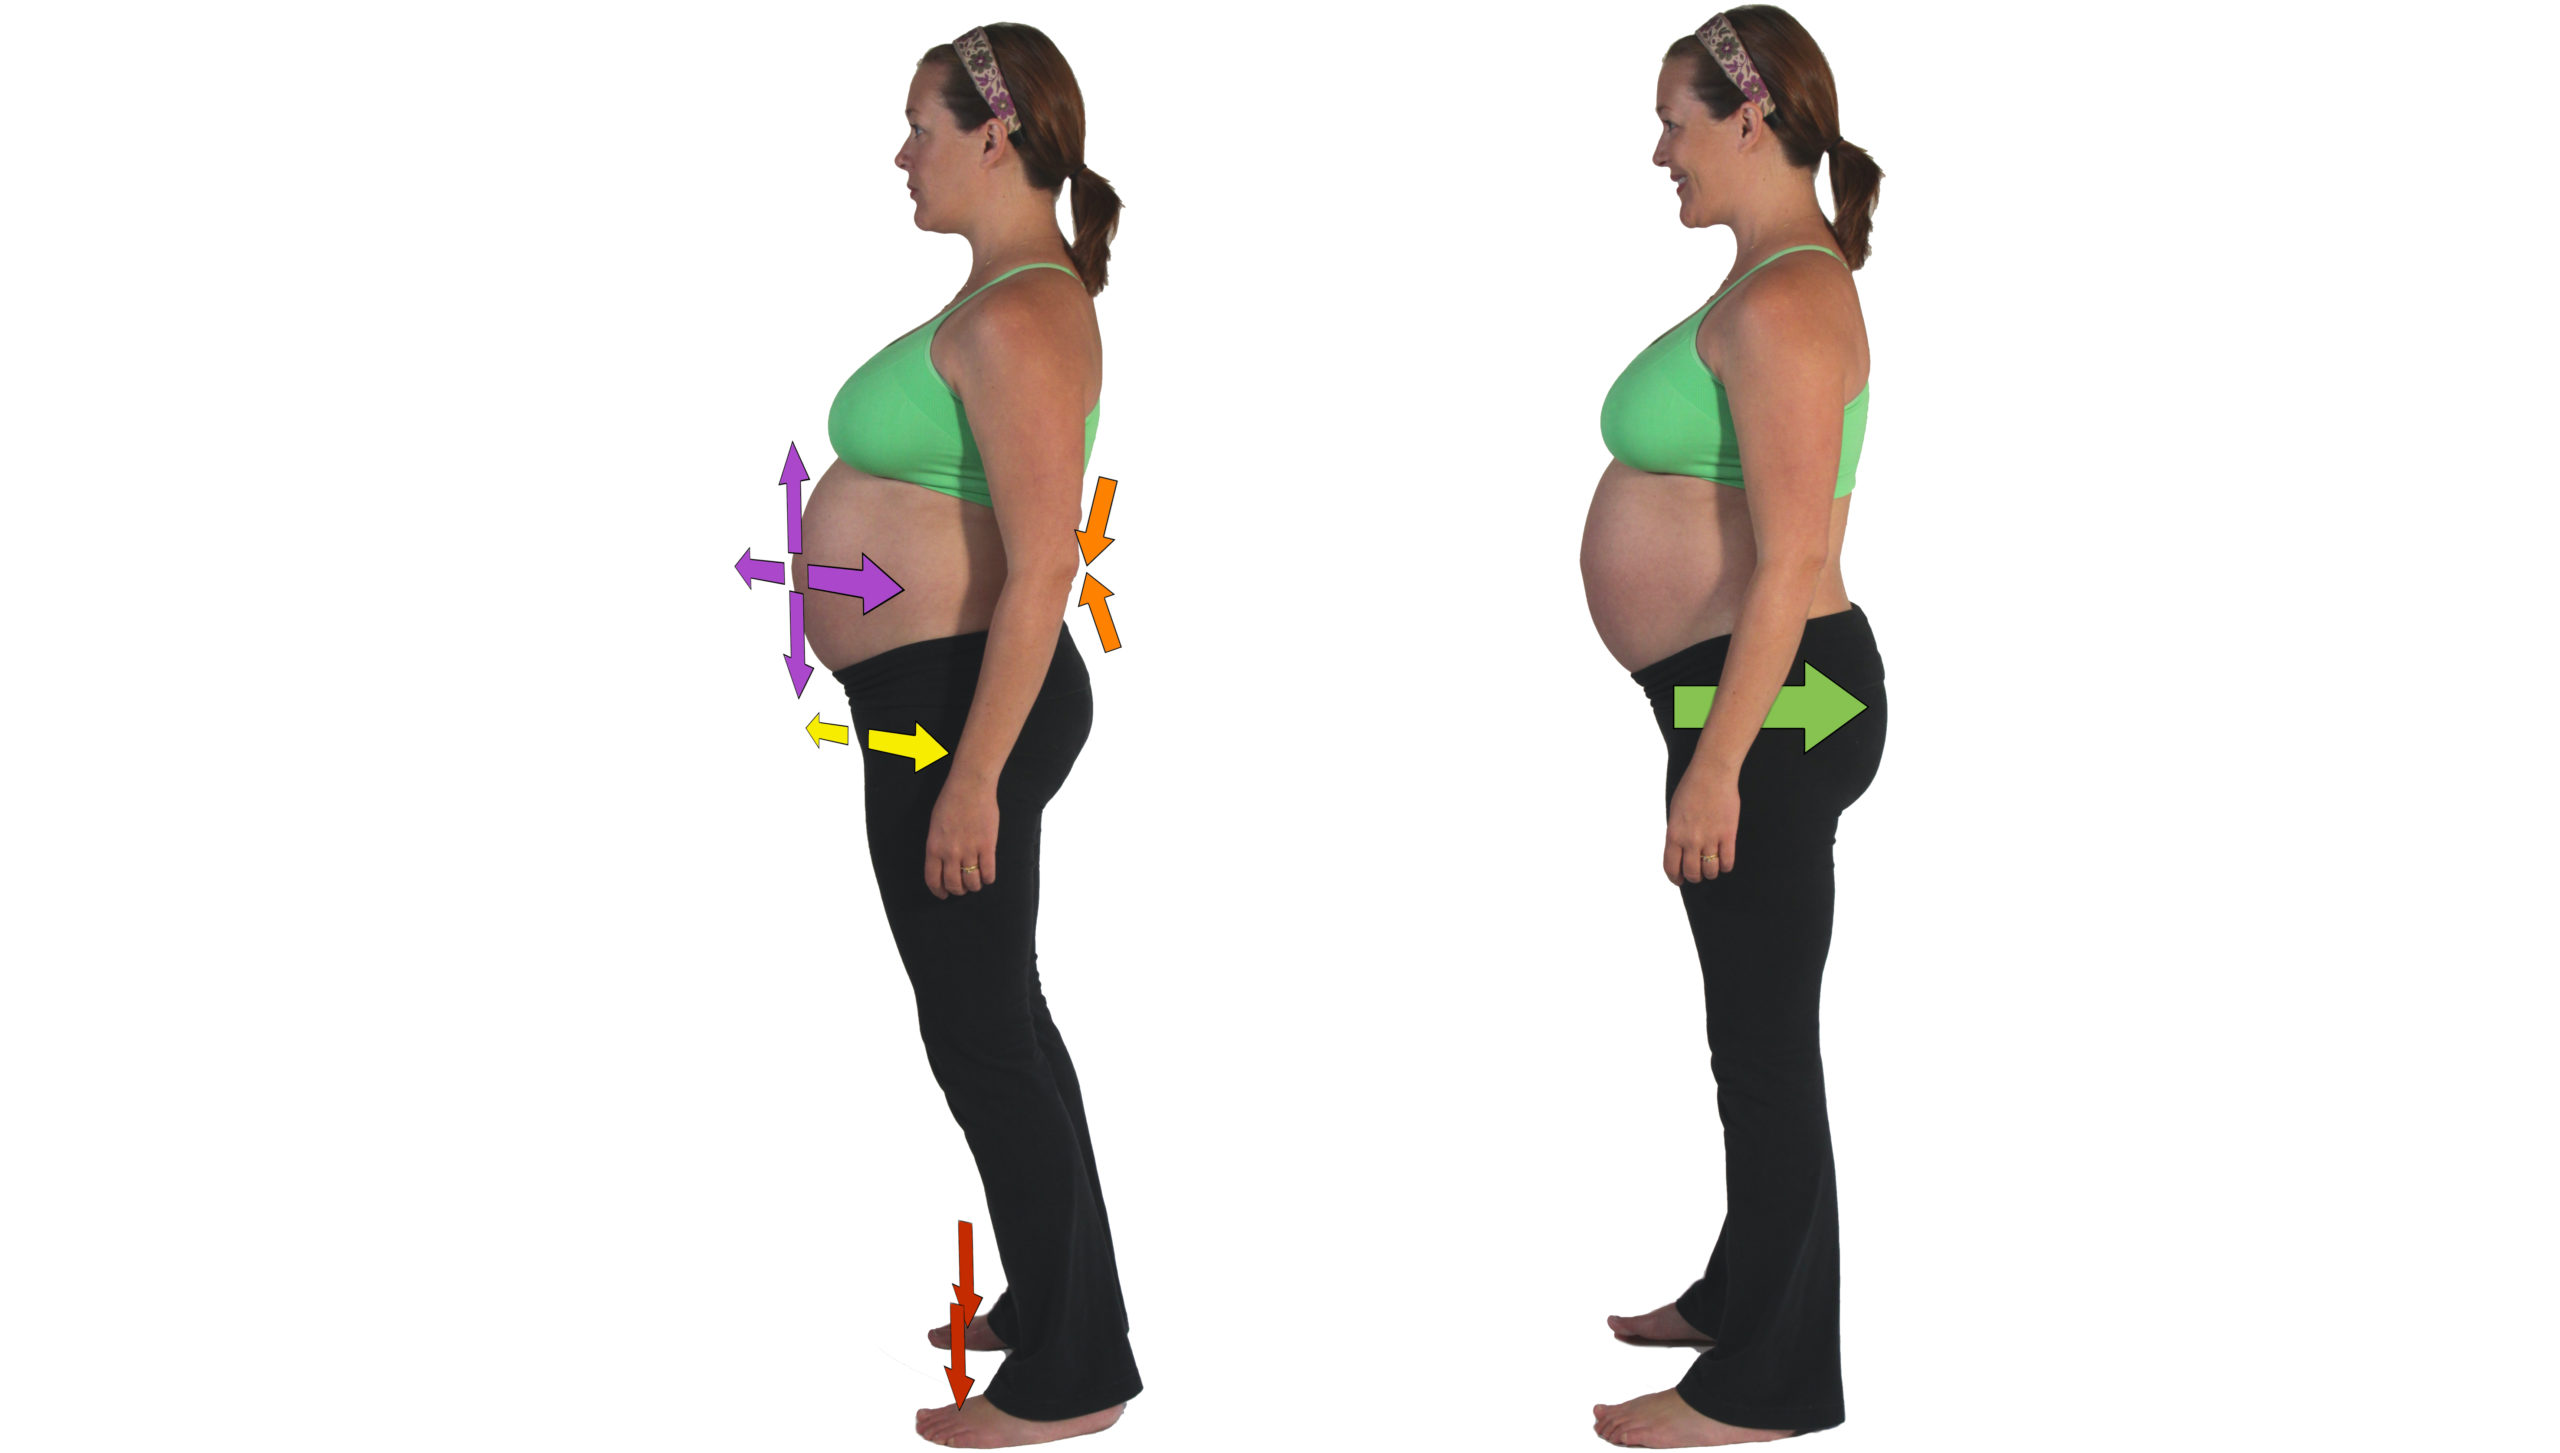 Body Ready Method - Squatting during pregnancy. I have heard a lot of  myths! I have heard everything from don't let your knees go higher than  your hips in the third trimester